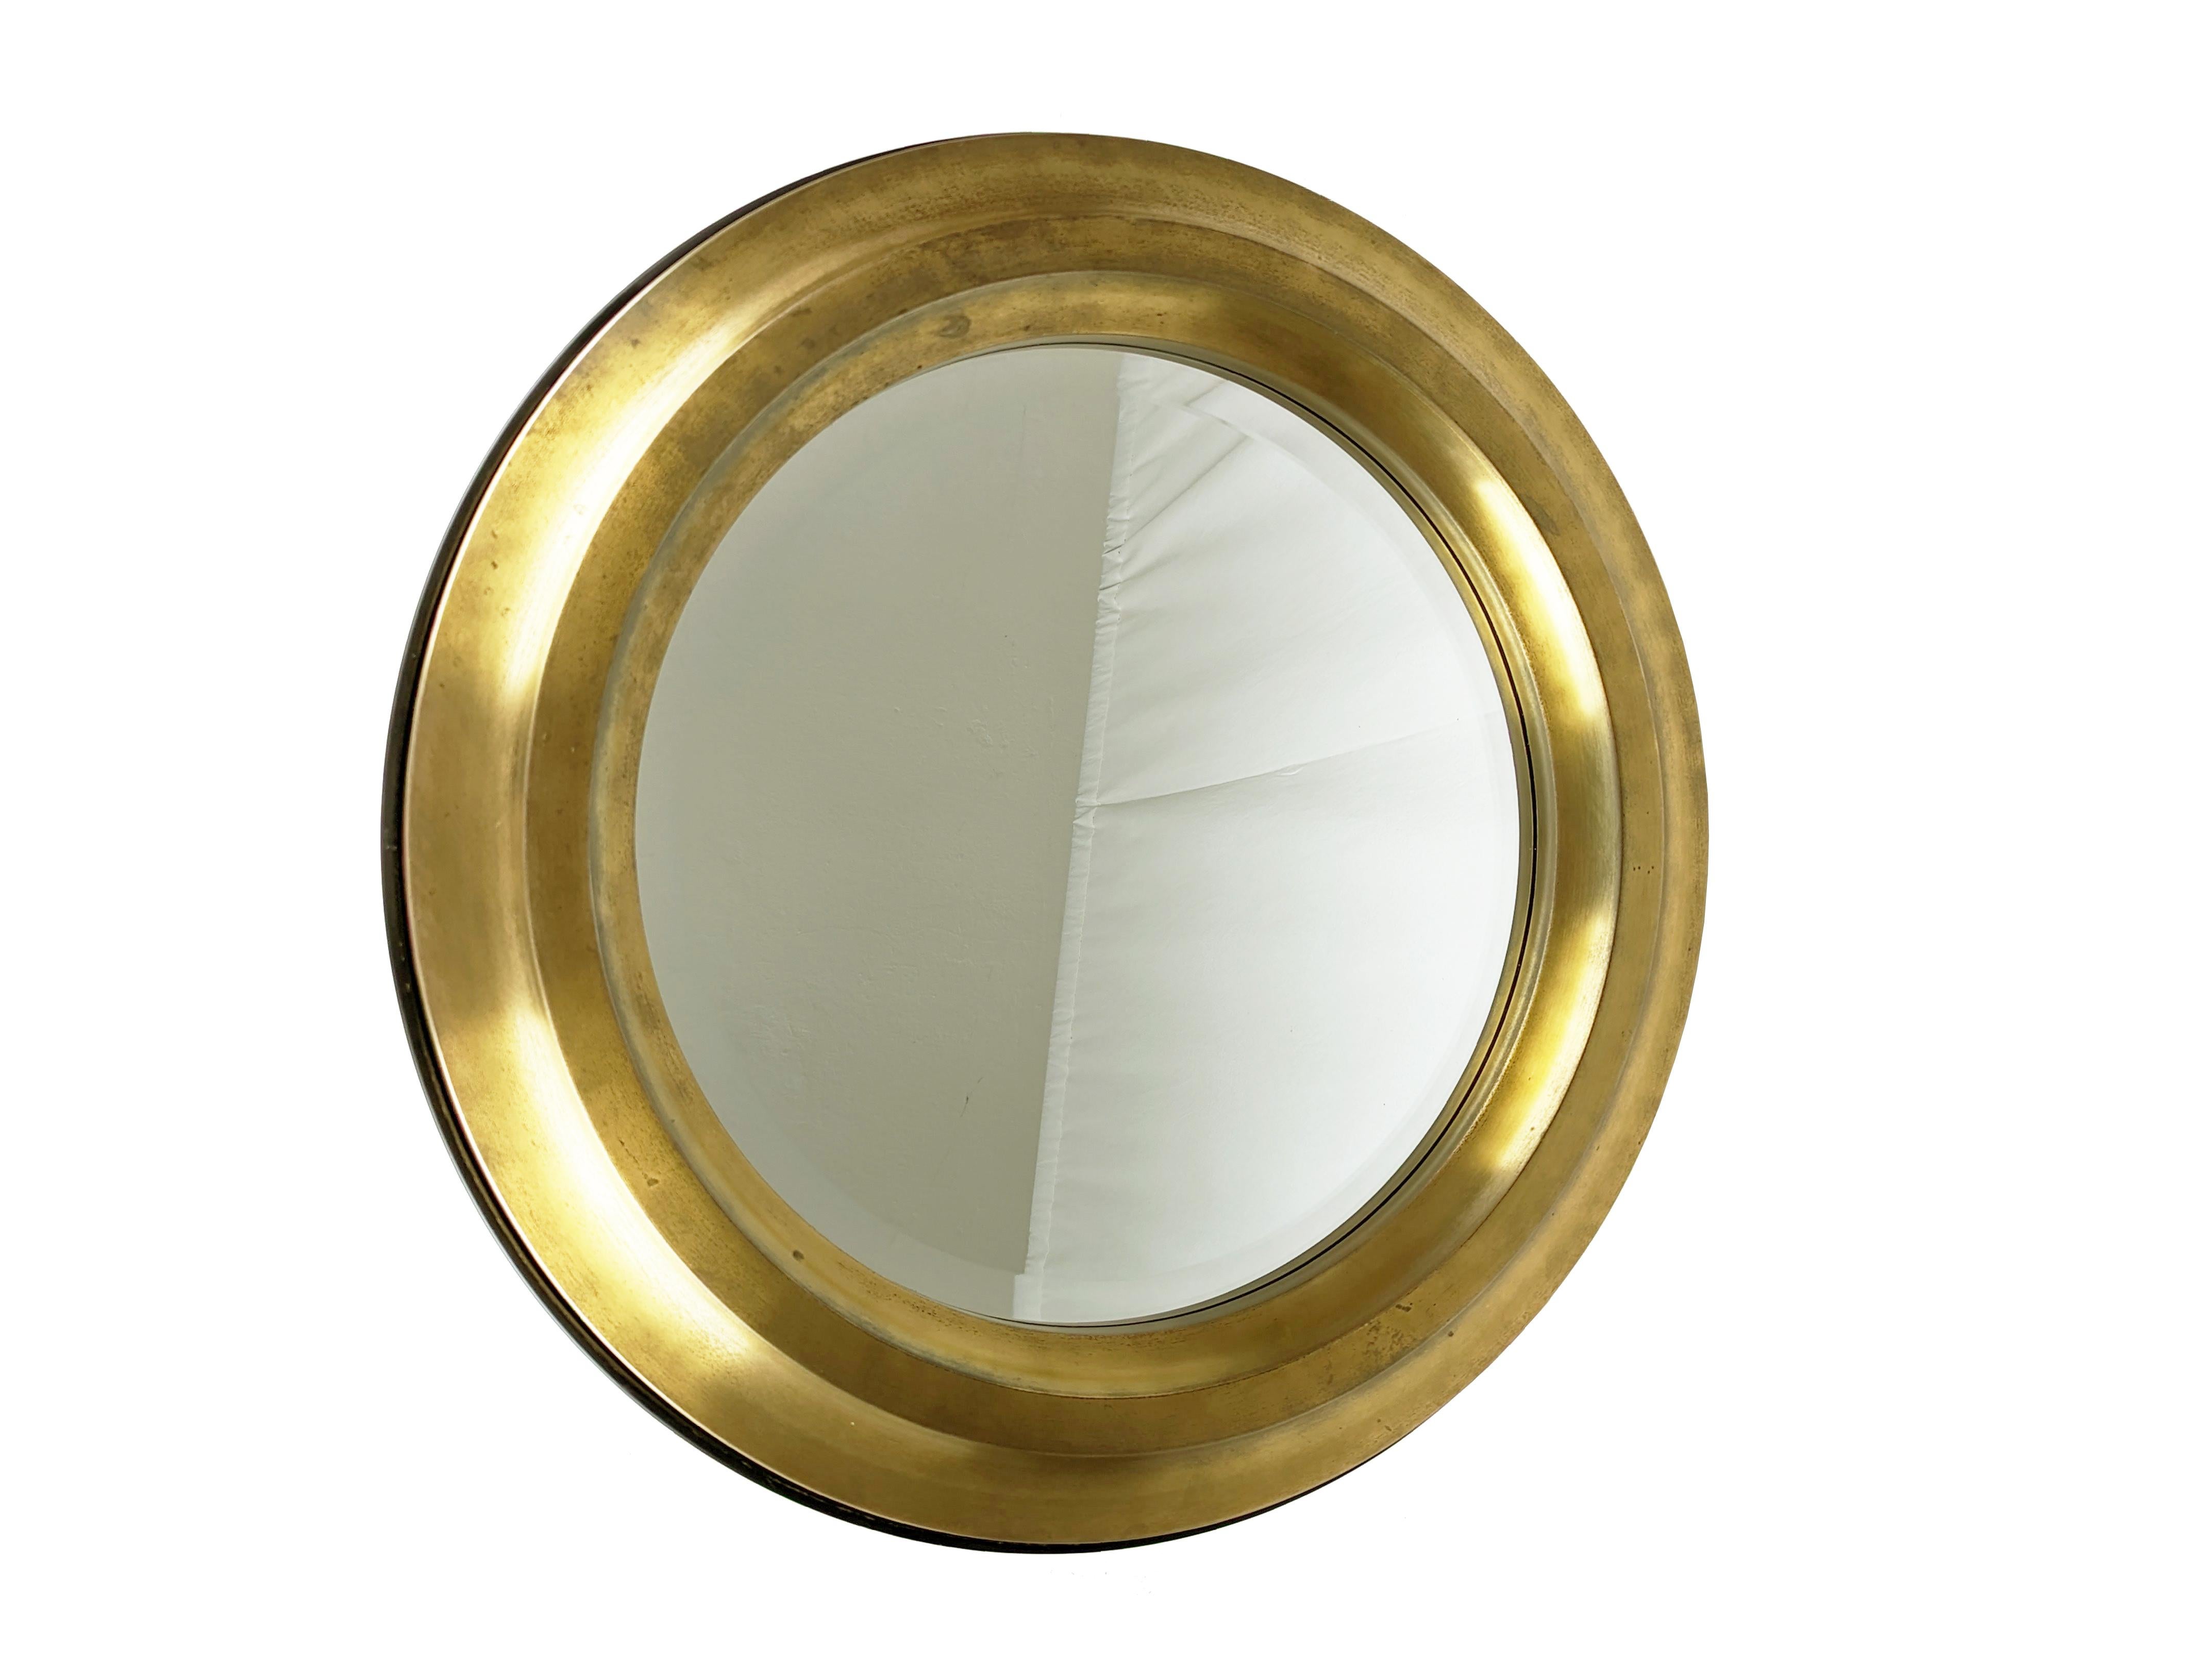 Set of 2 wall mirrors in brass, nickel-plated and painted metal. Their design, quality and style are reminiscent of similar contemporary products from Artemide or Azucena. No visible signs of production. The mirrored glass is ground along the edge